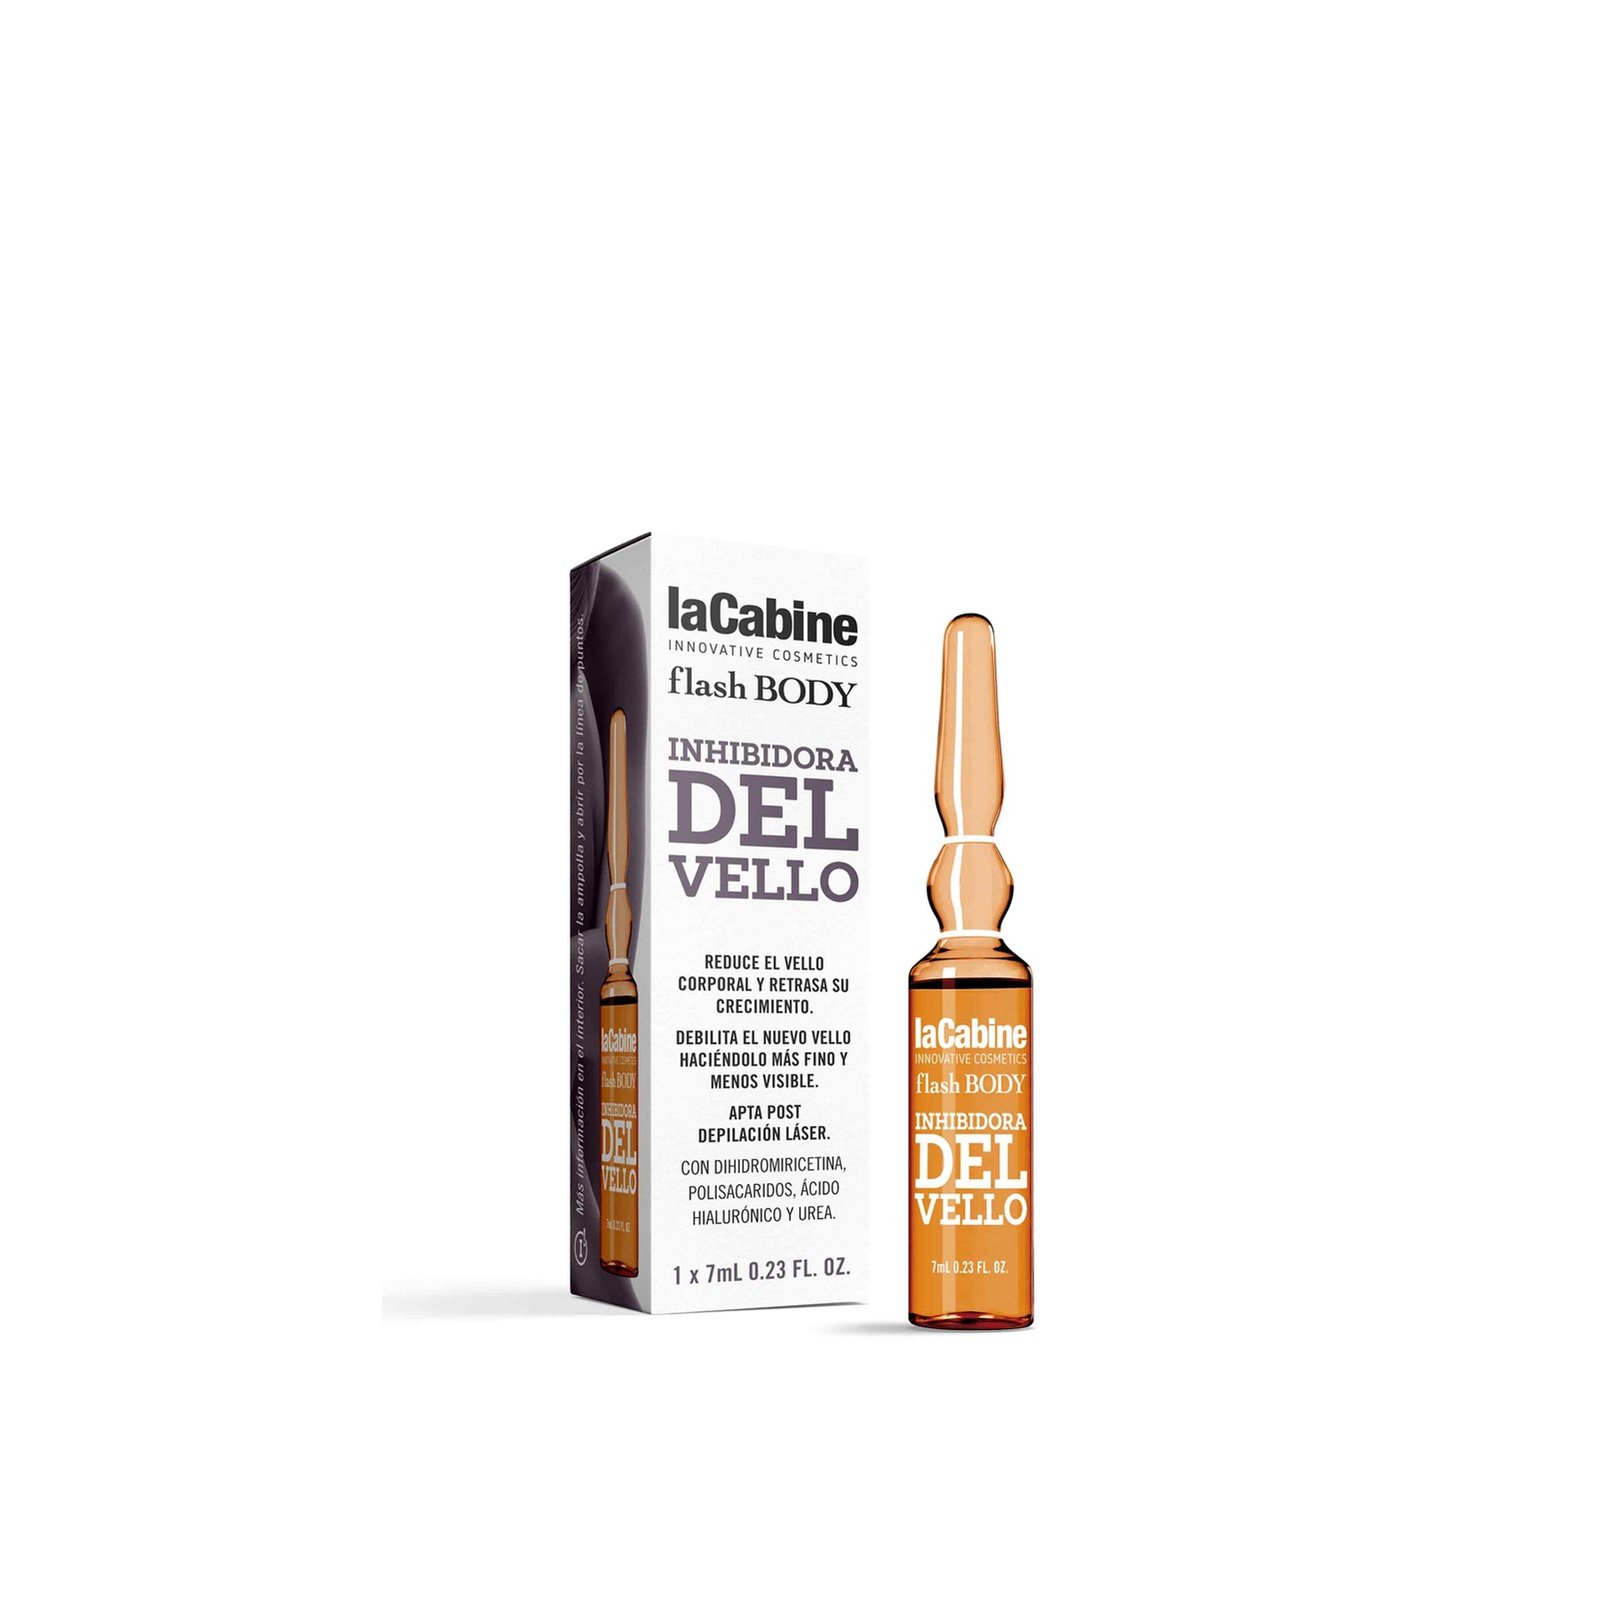 La Cabine Flash Body Hair Inhibitor Concentrated Ampoule 1x7ml (0.34 fl oz)